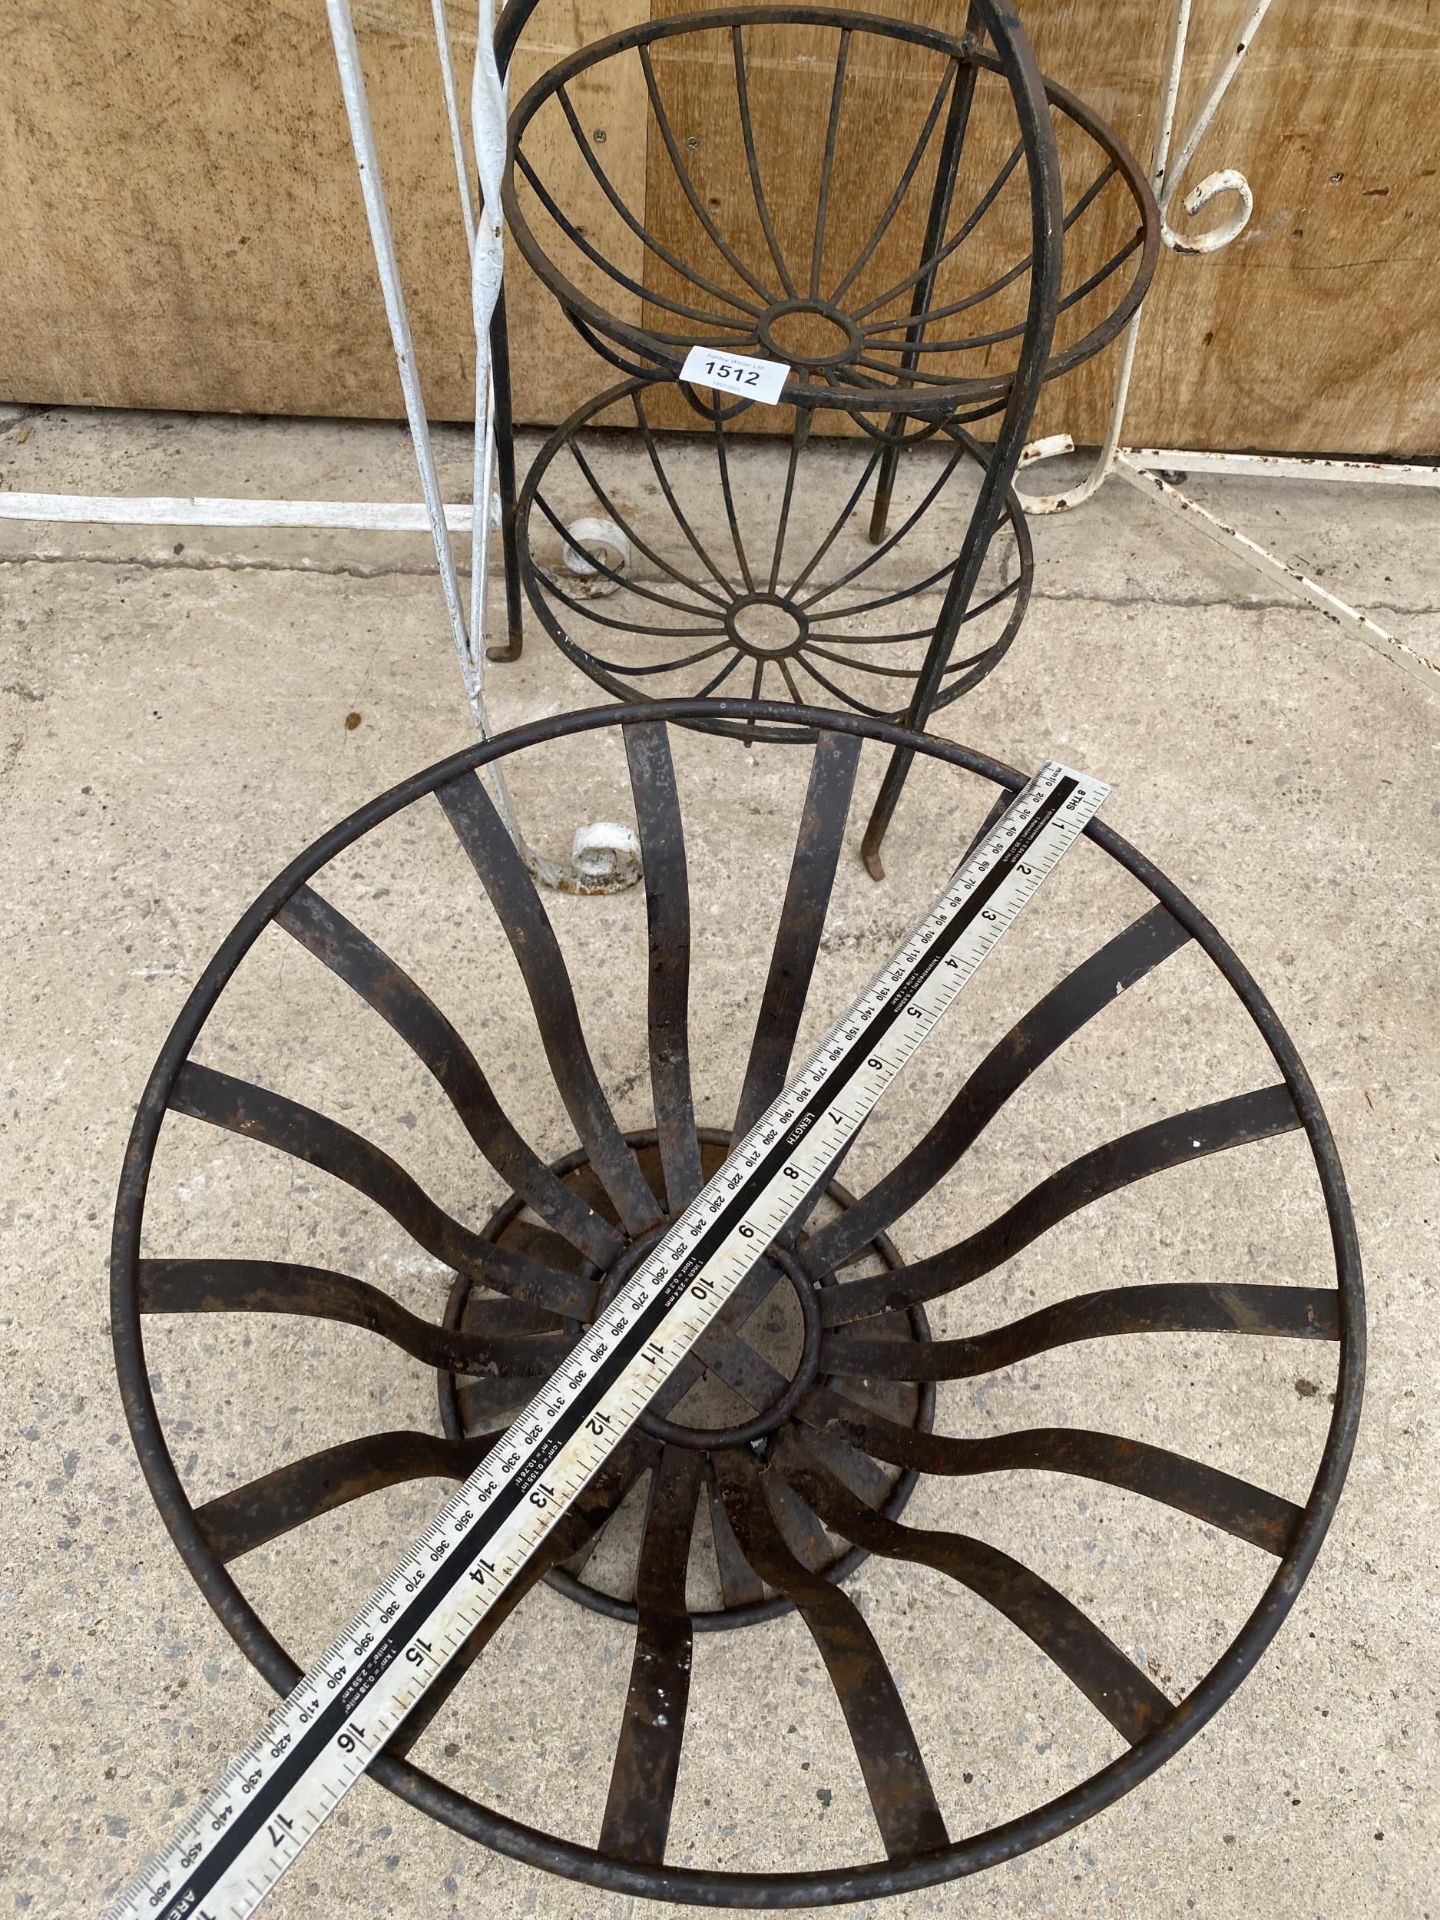 TWO DECORATIVE METAL PLANT STANDS - Image 3 of 3